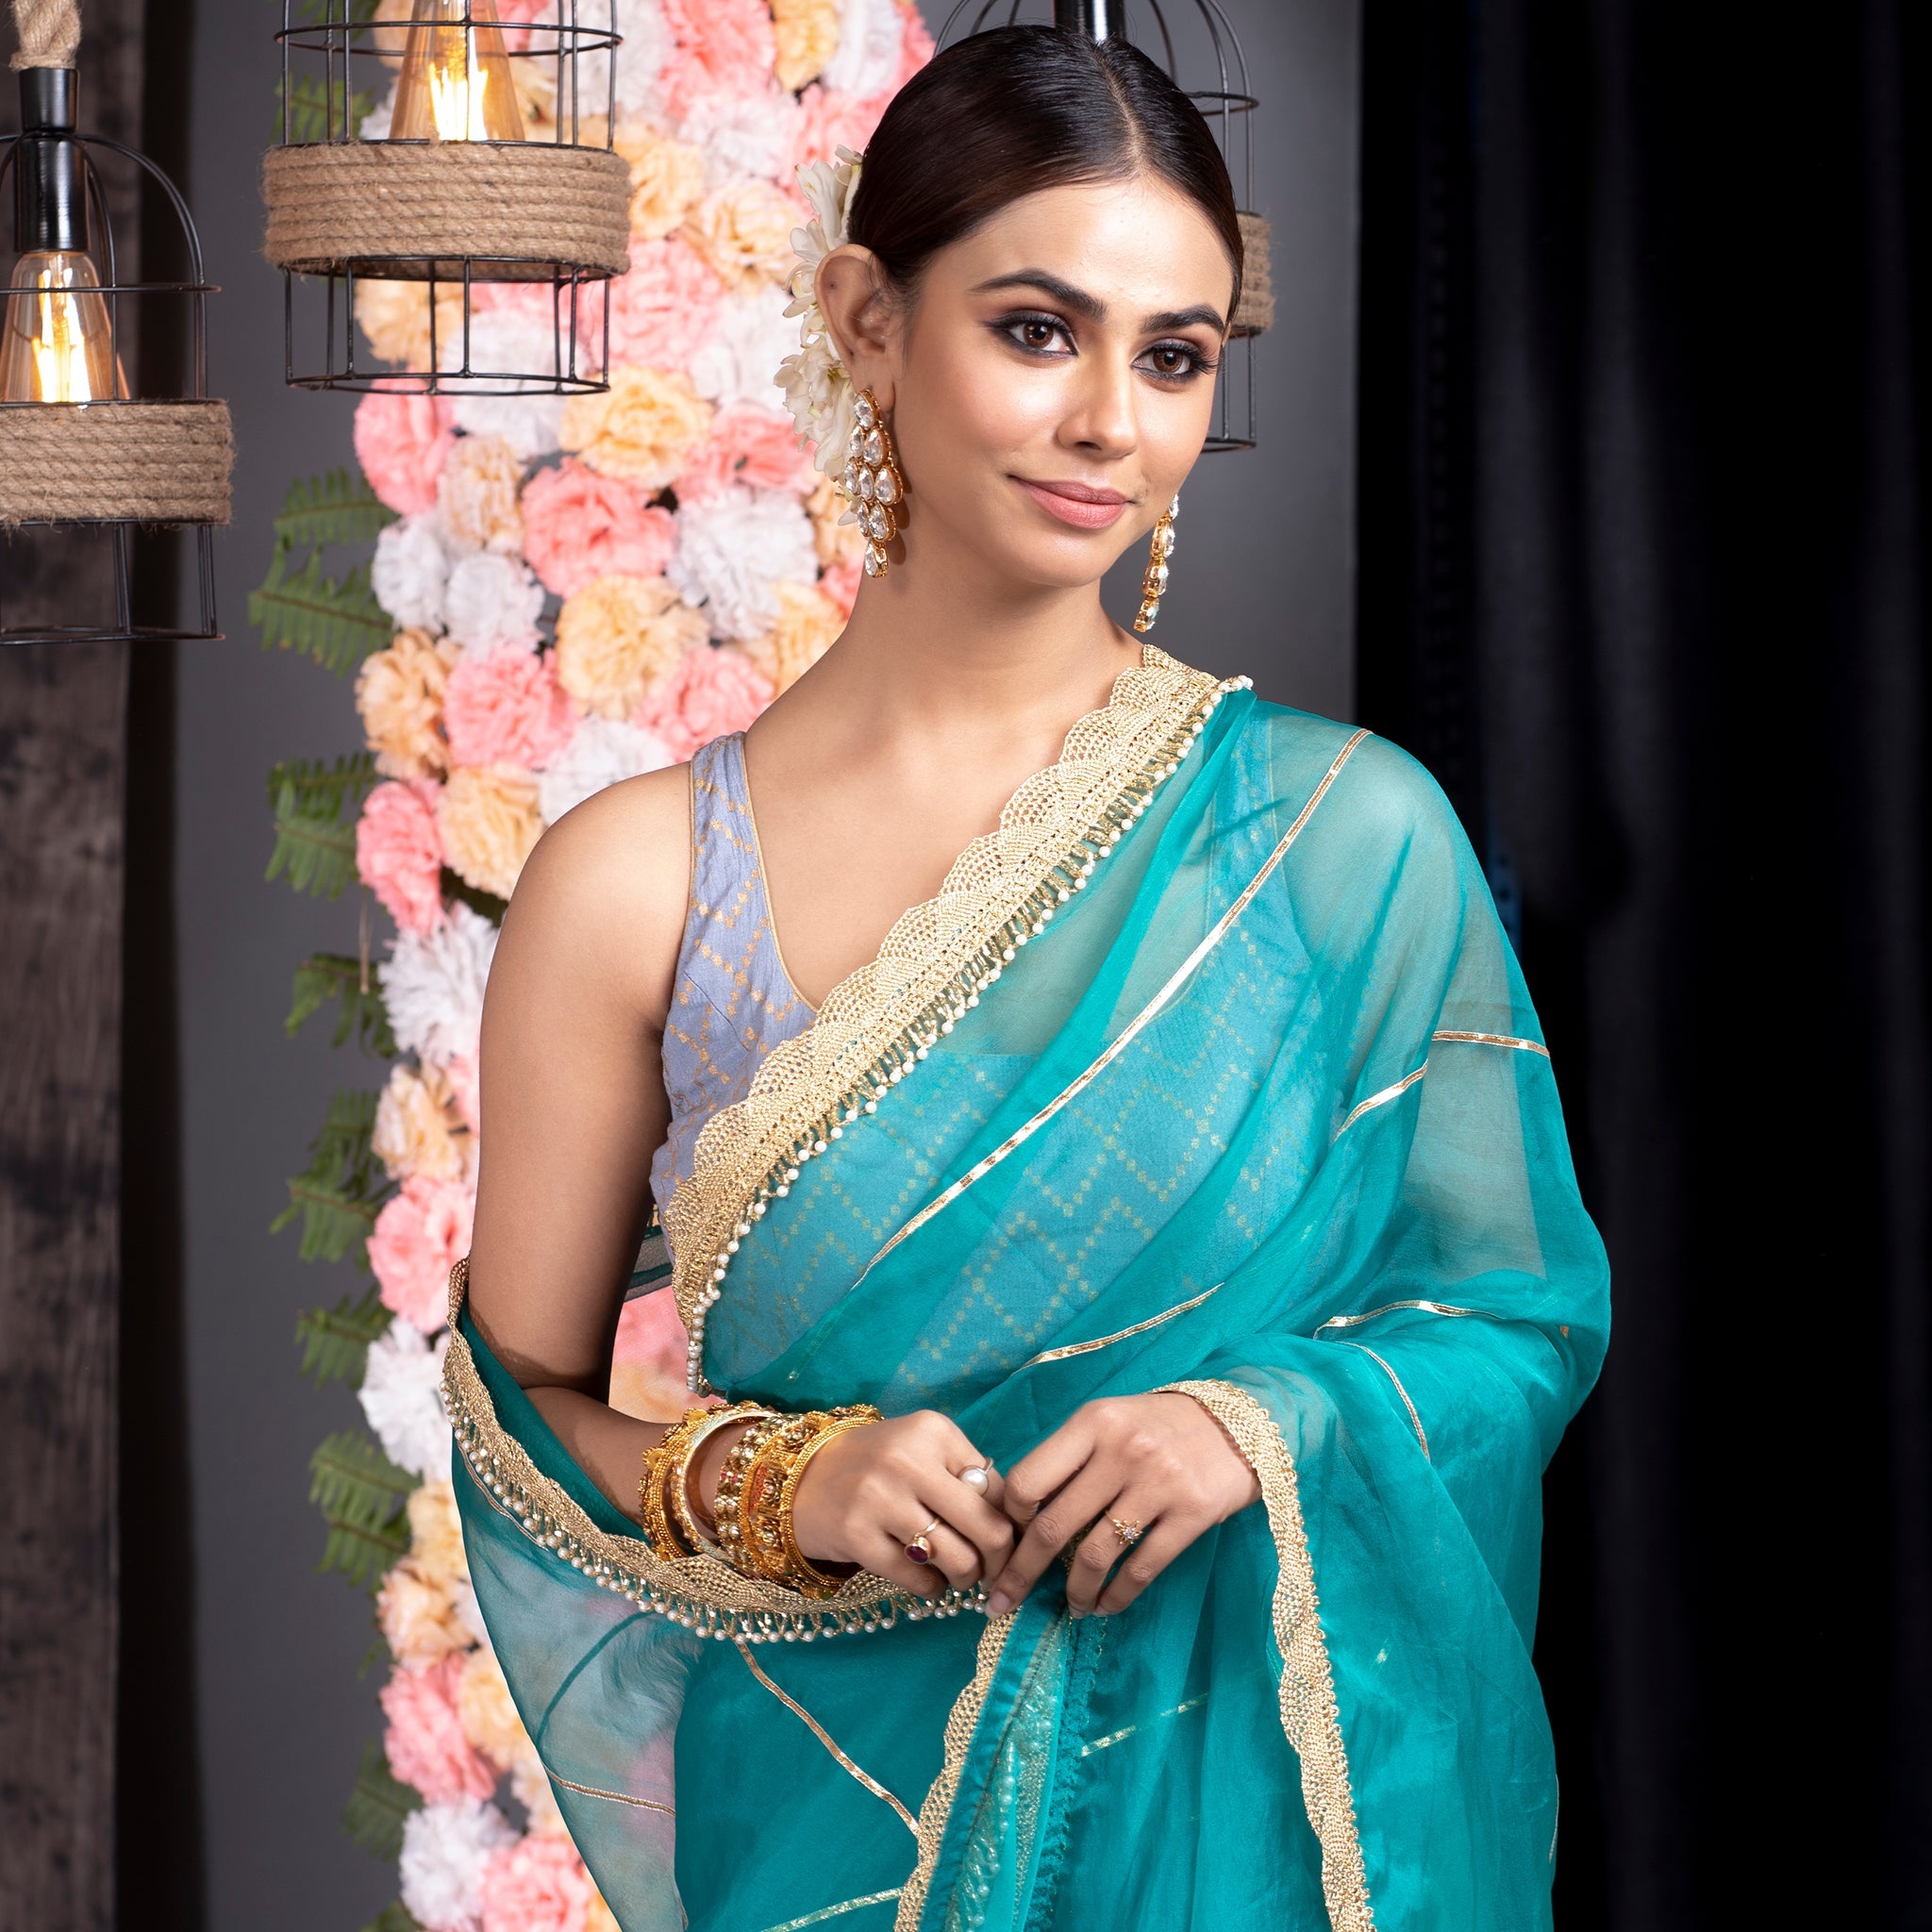 Women's Teal Organza Saree With Gota Work And Scallop Border - Boveee